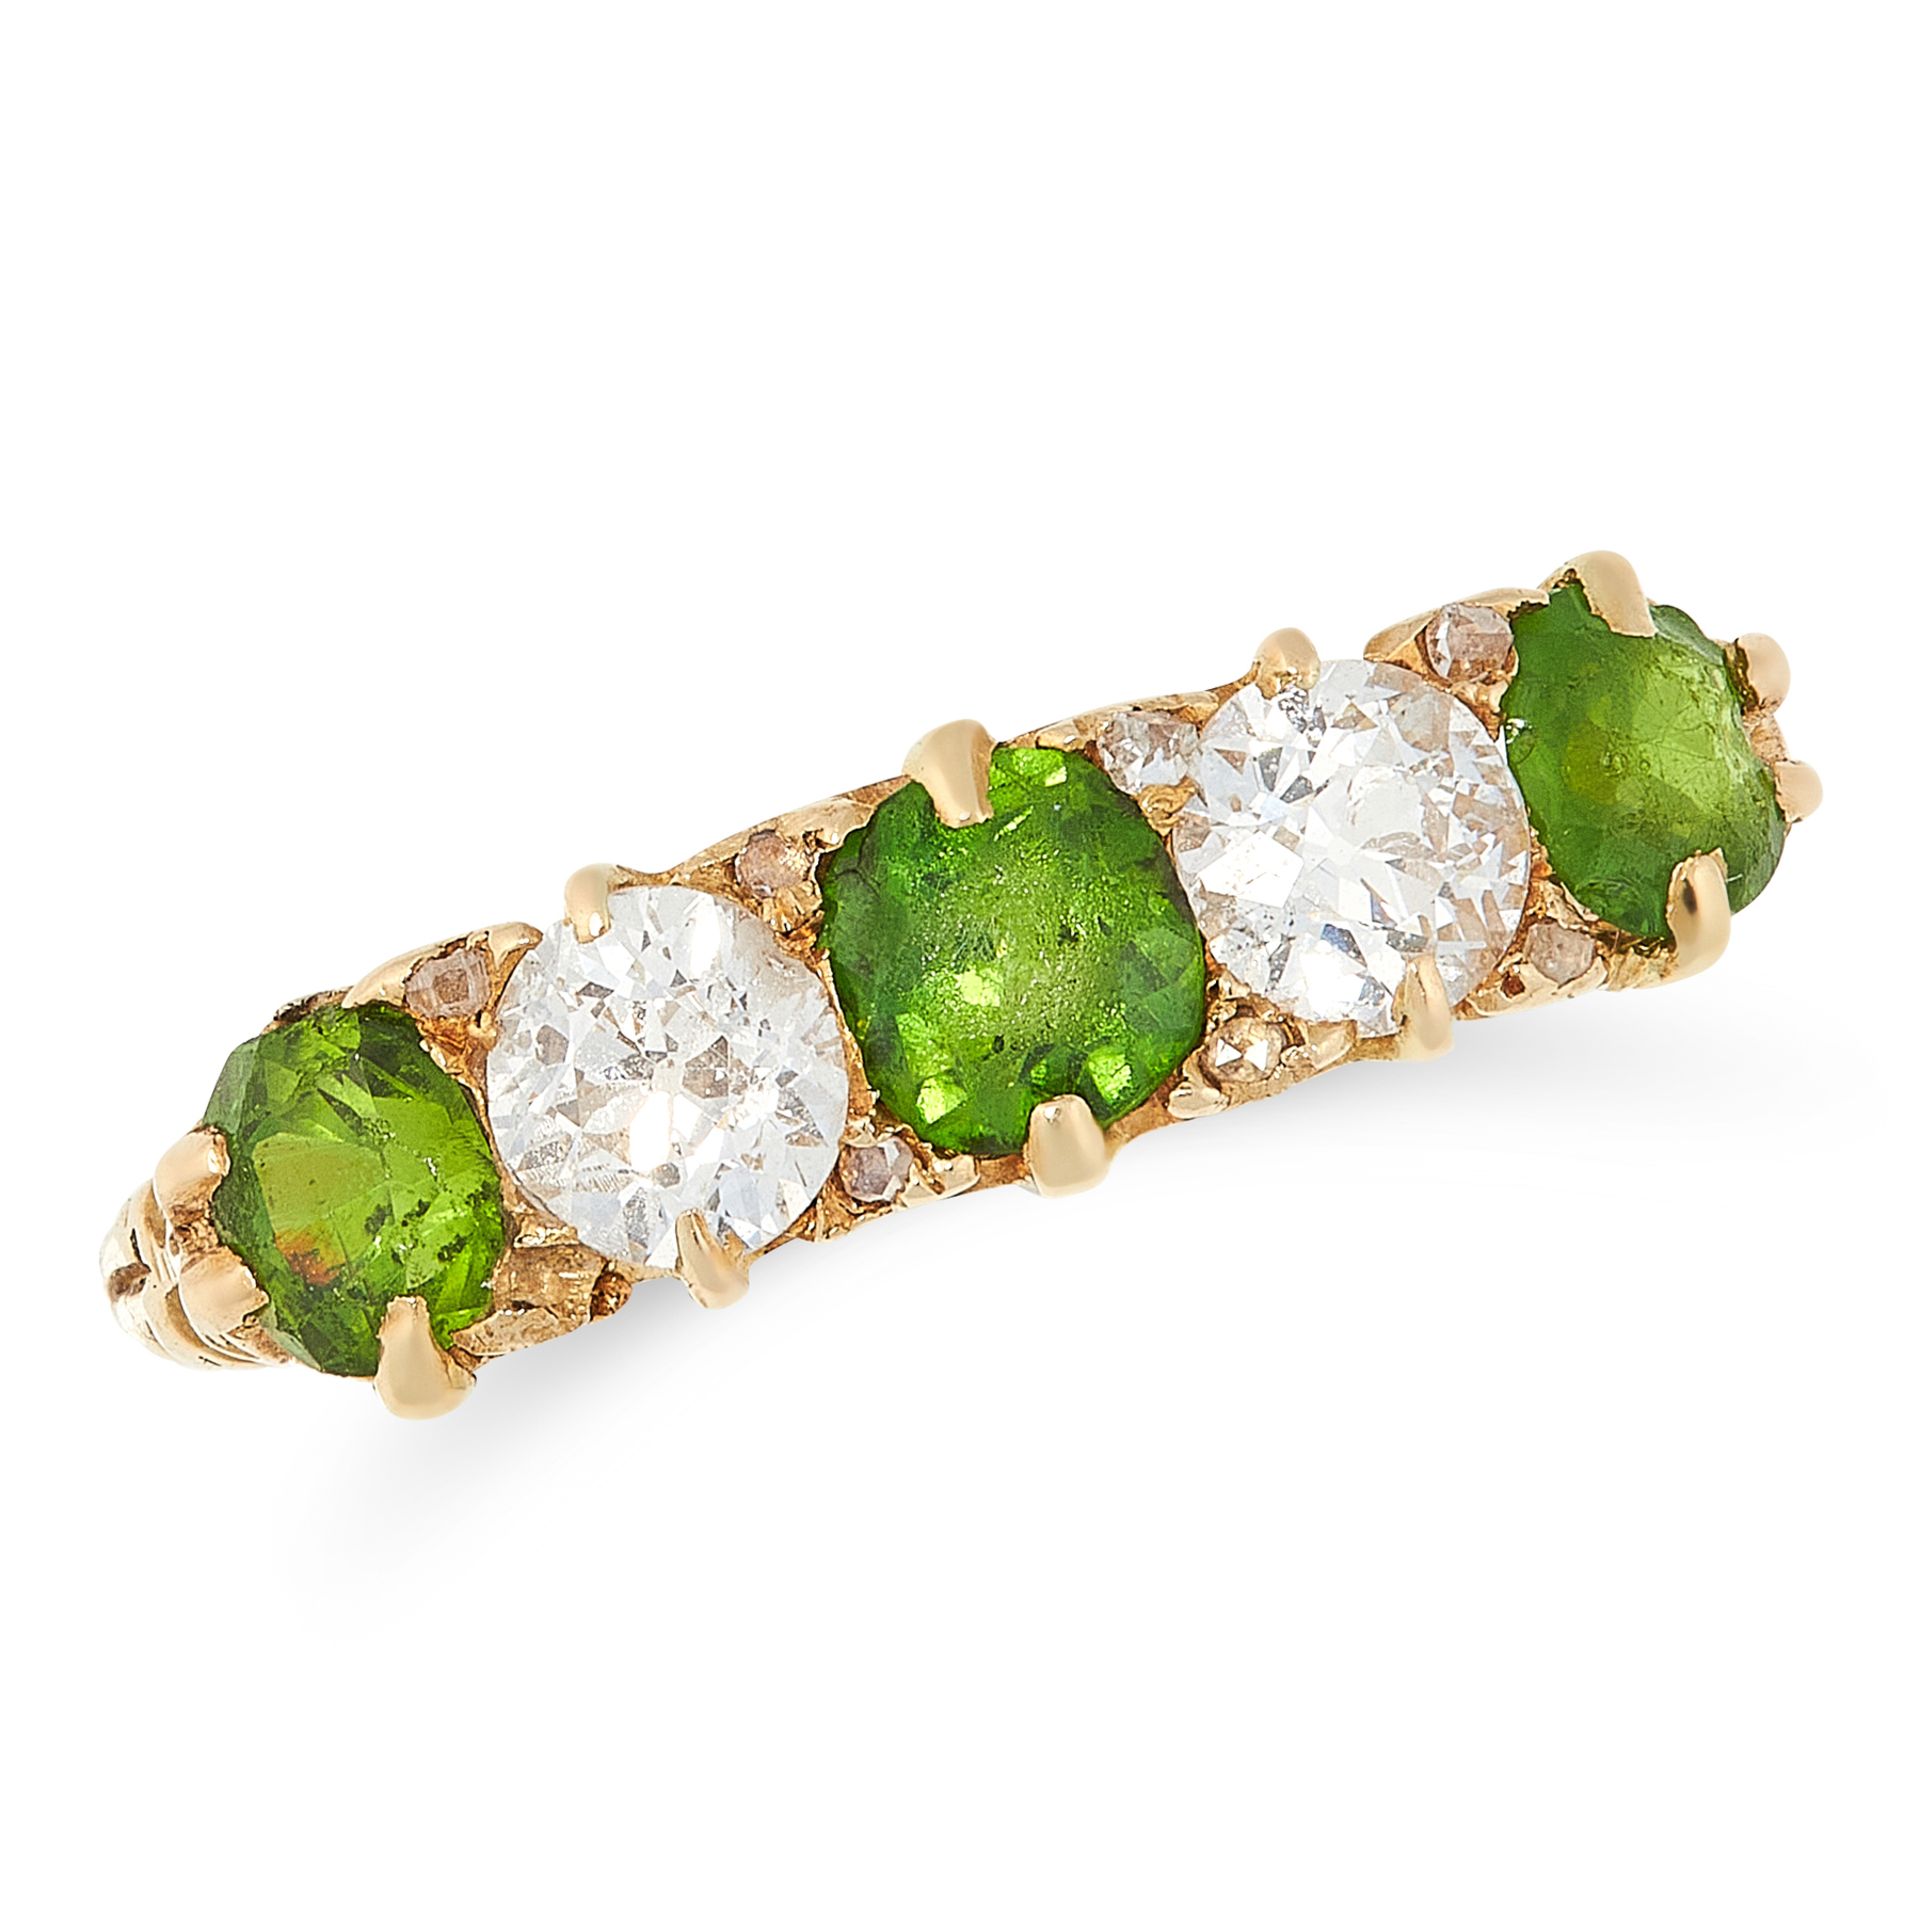 AN ANTIQUE DEMANTOID GARNET AND DIAMOND RING in high carat yellow gold, set with five alternating